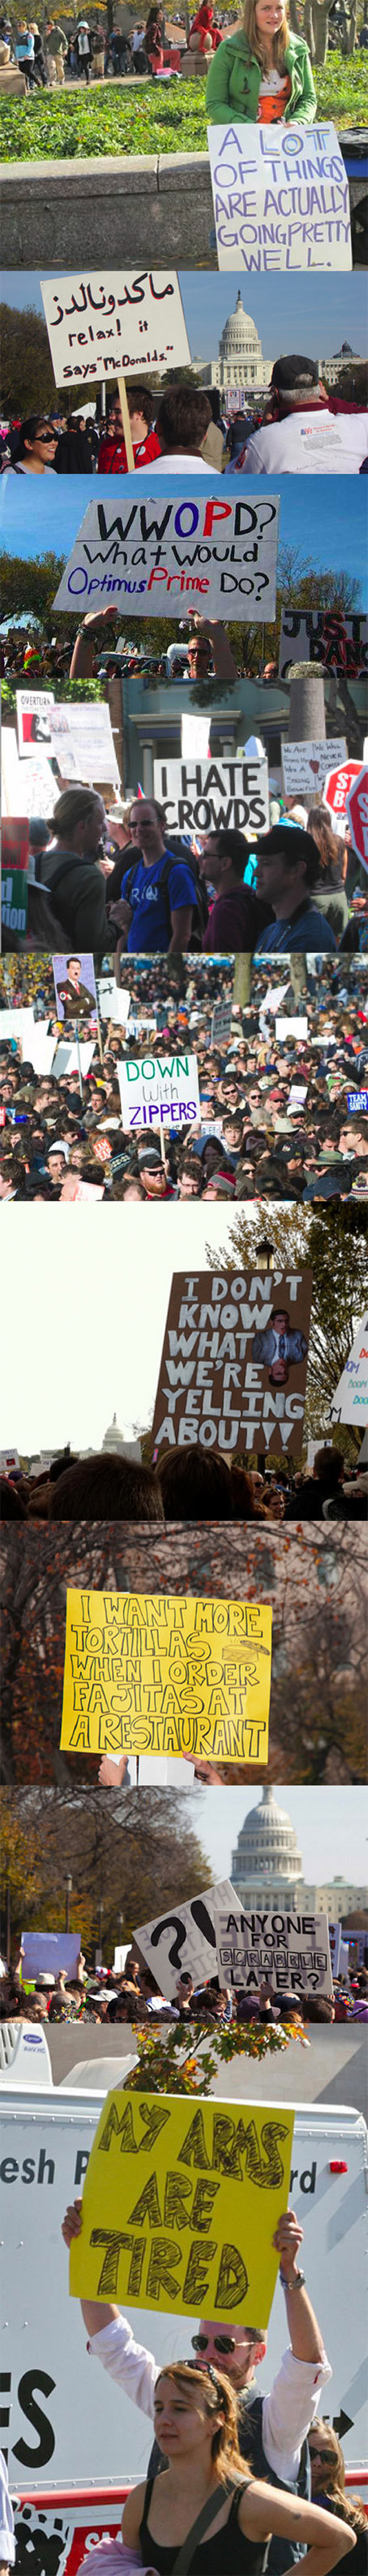 Fun With Protest Signs